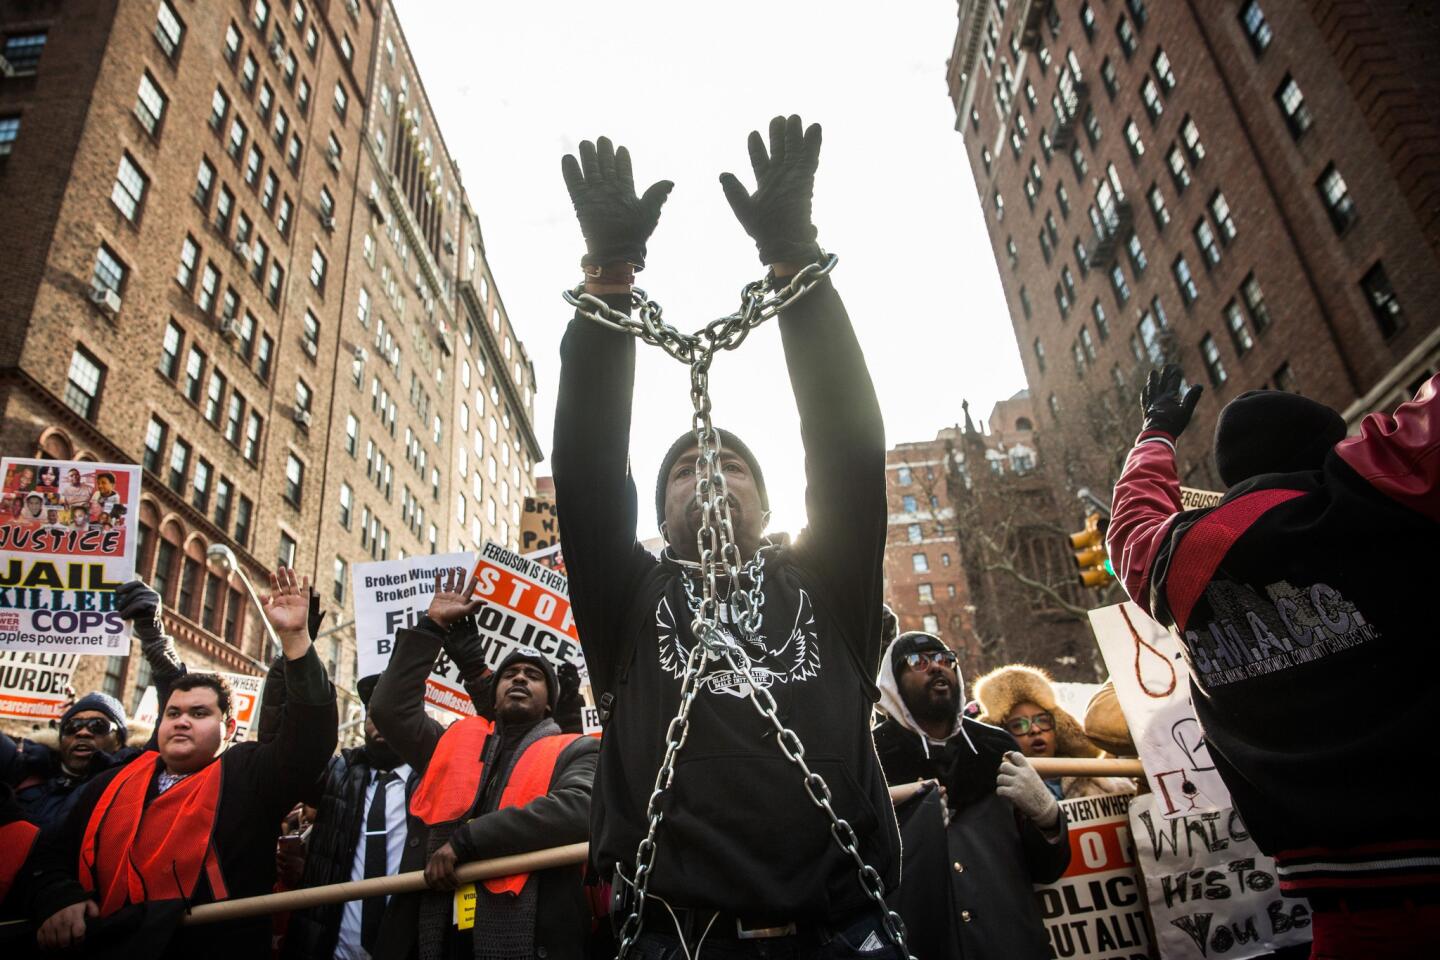 A man is wrapped in chains as people march in the National March Against Police Violence through the streets of Manhattan on December 13, 2014 in New York City.